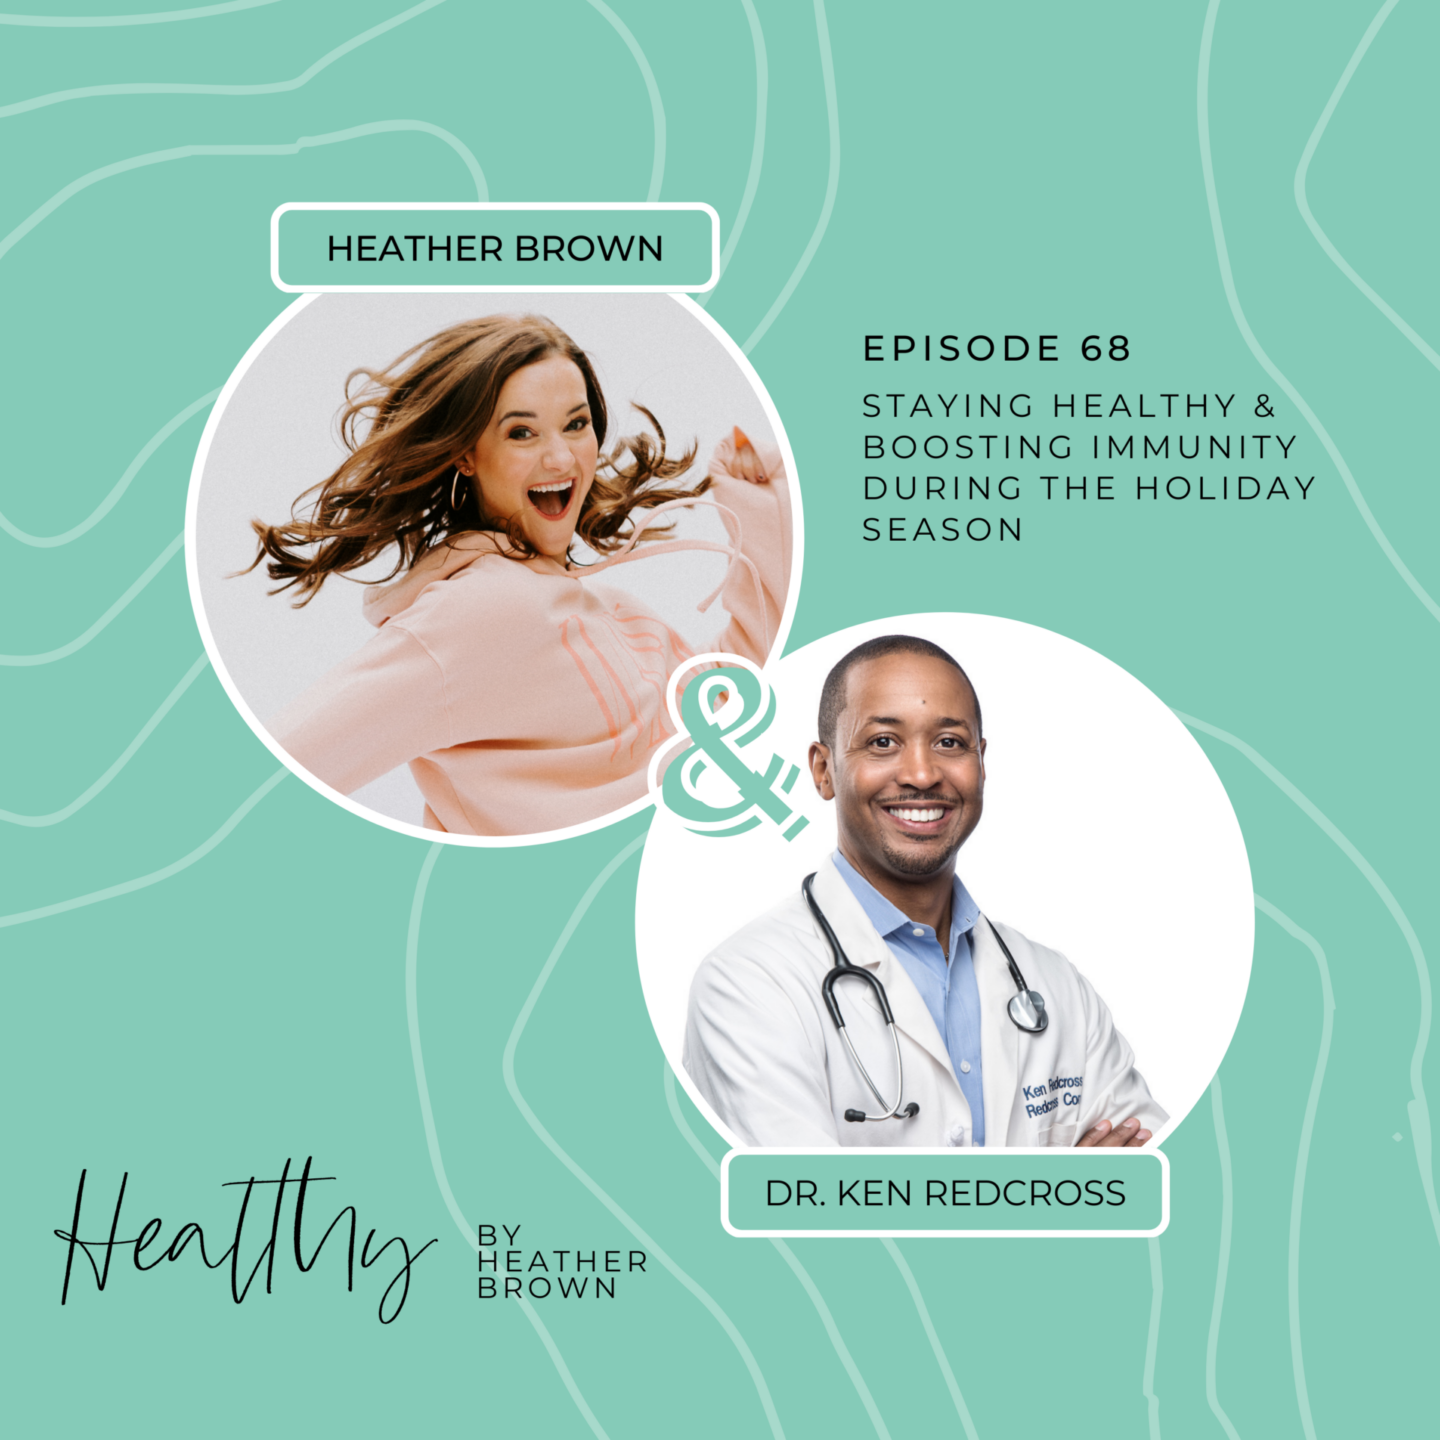 Christian Birmingham podcaster & health coach, Heather Brown, interviews Dr. Ken Redcross on boosting immunity during the holidays.